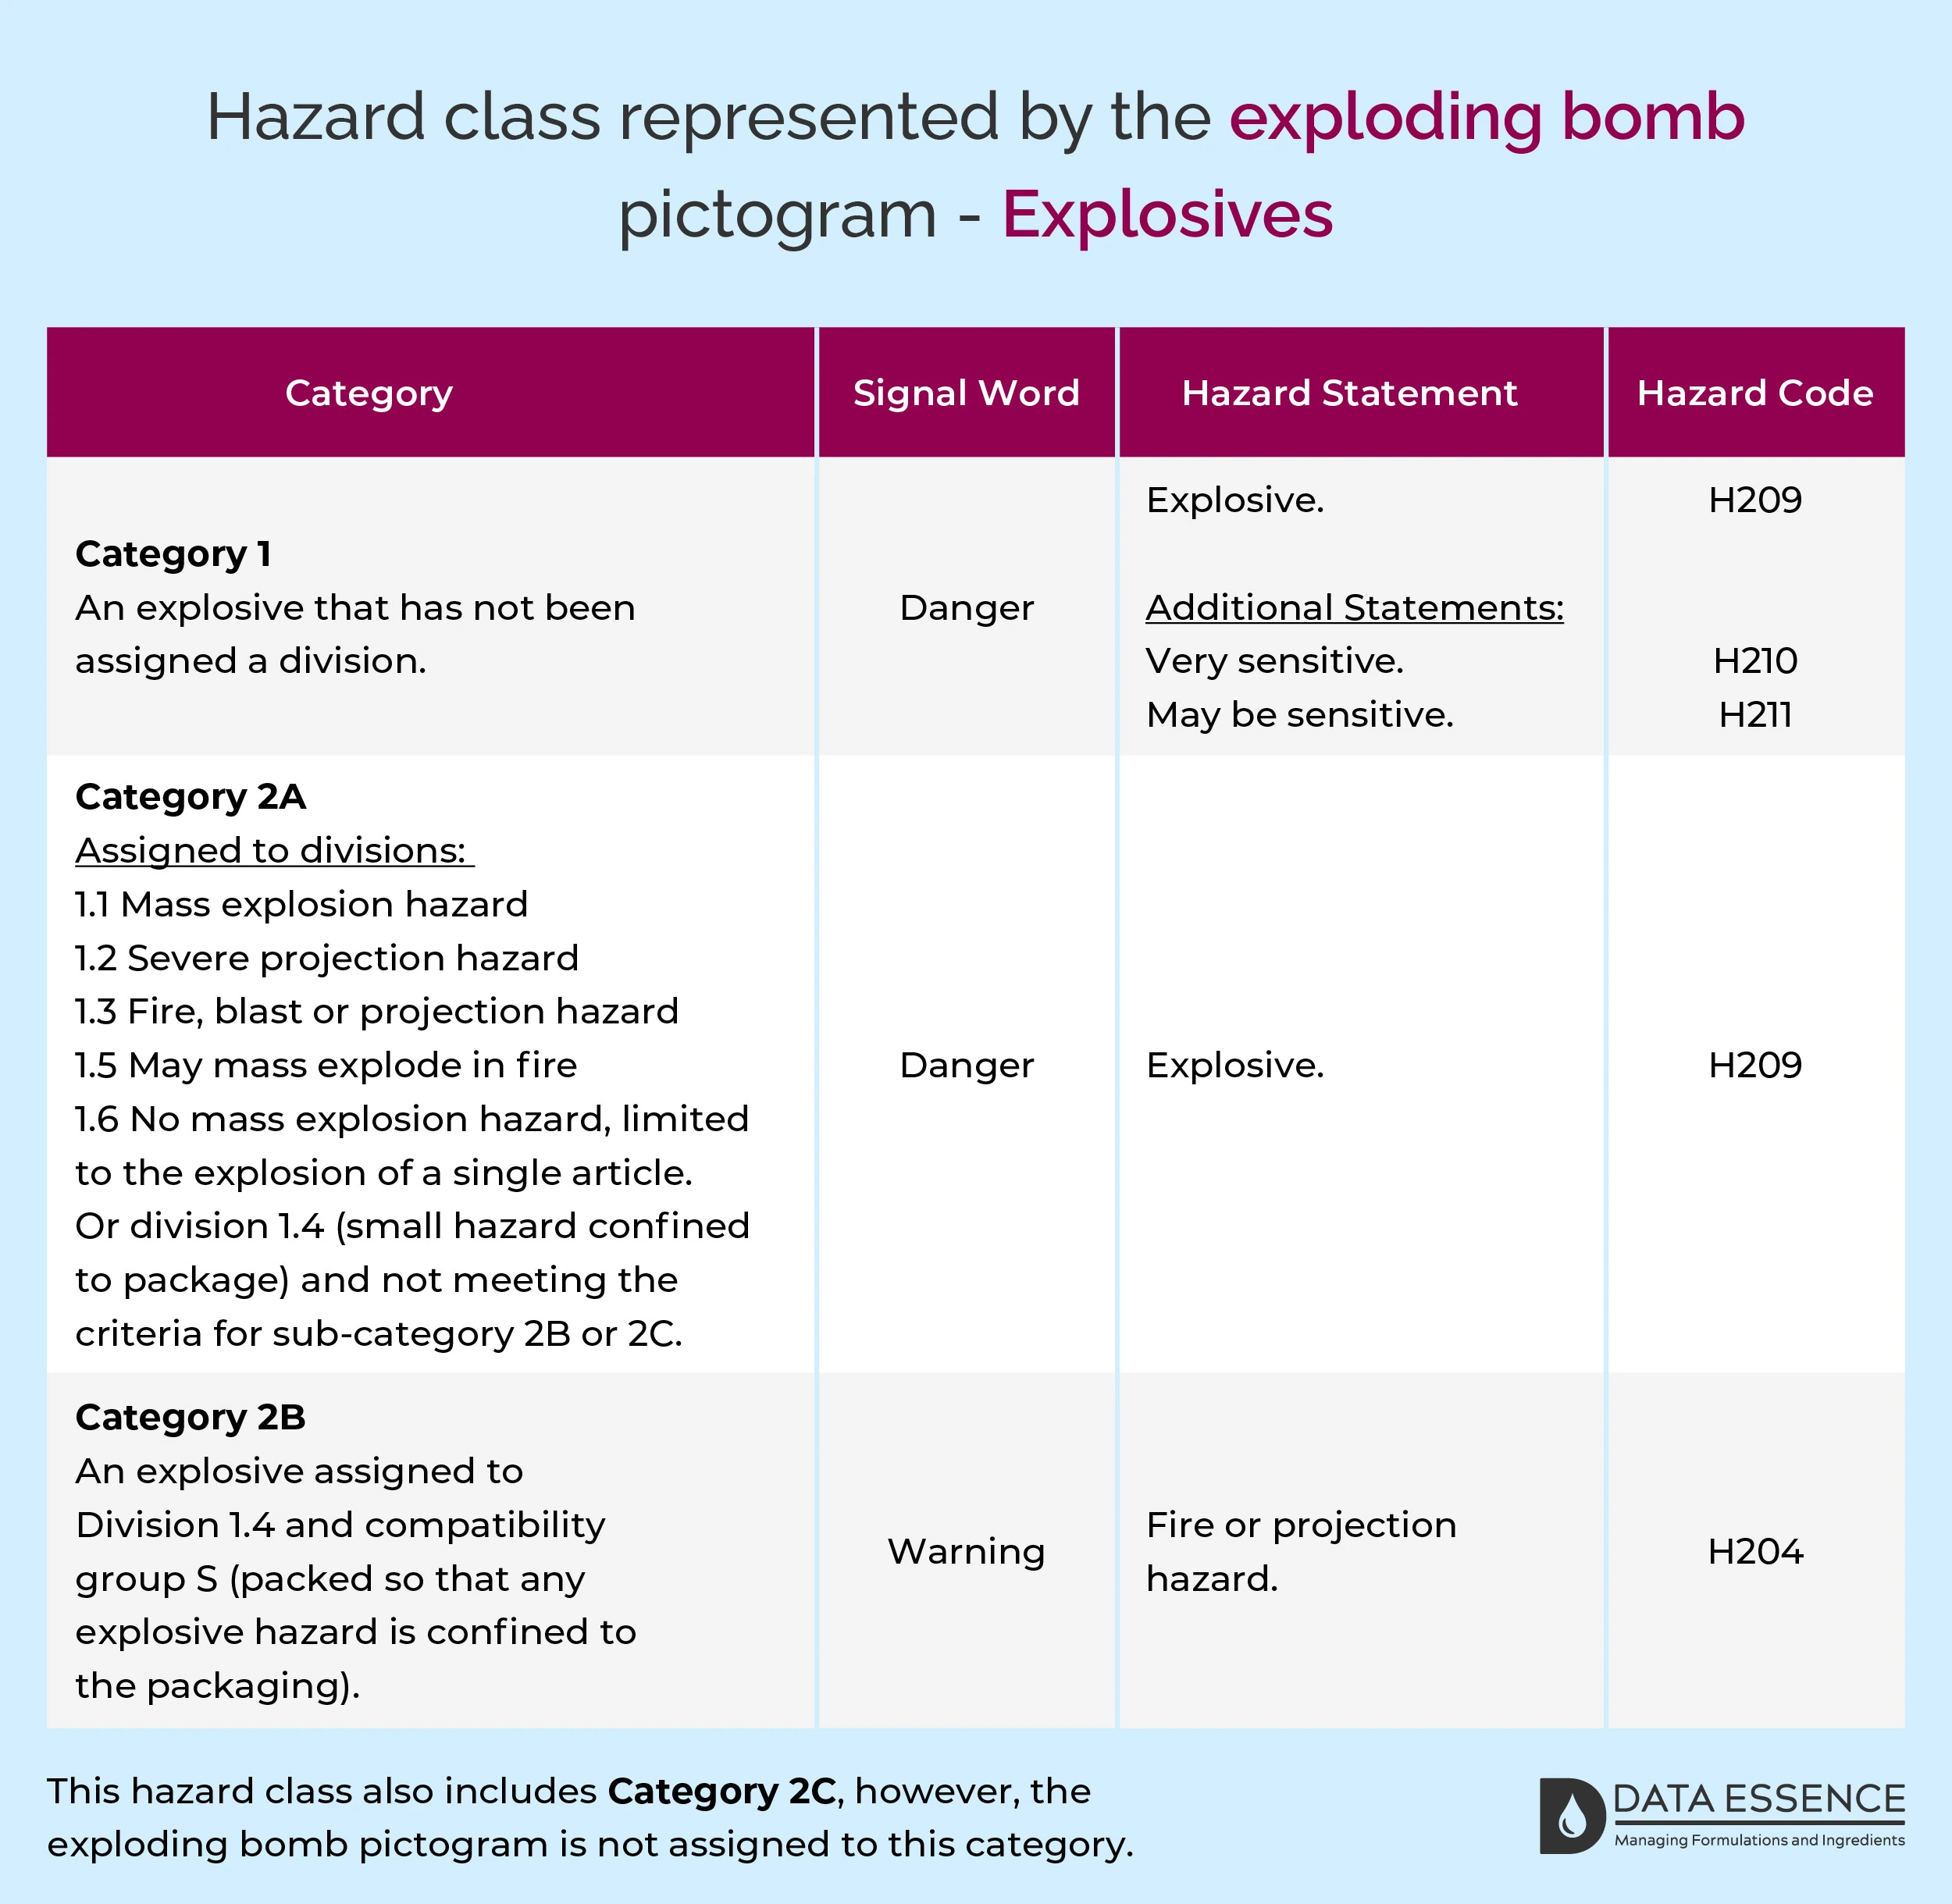 Hazard class represented by the exploding bomb pictogram - Explosives